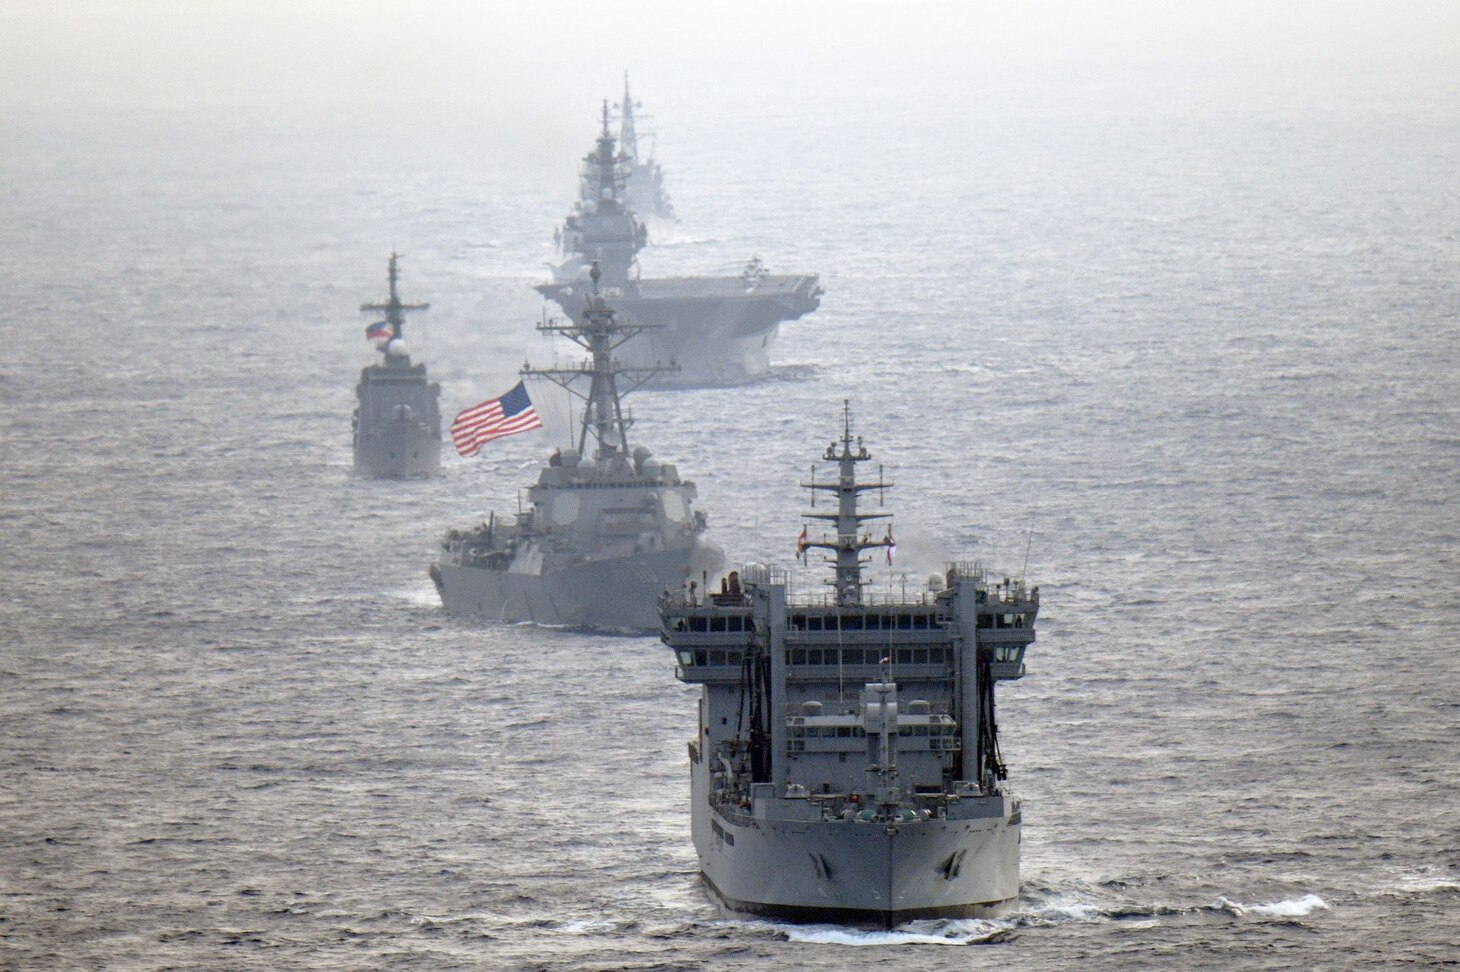 Navy guided-missile destroyer USS William P. Lawrence (DDG 110), transits through international waters with the Indian Navy destroyer INS Kolkata (D 63) and tanker INS Shakti (A 57), Japan Maritime Self-Defense Force helicopter-carrier JS Izumo (DDH 183) and destroyer JS Murasame (DD 101), and Republic of Philippine Navy patrol ship BRP Andres Bonifacio (PS 17) through the South China Sea.